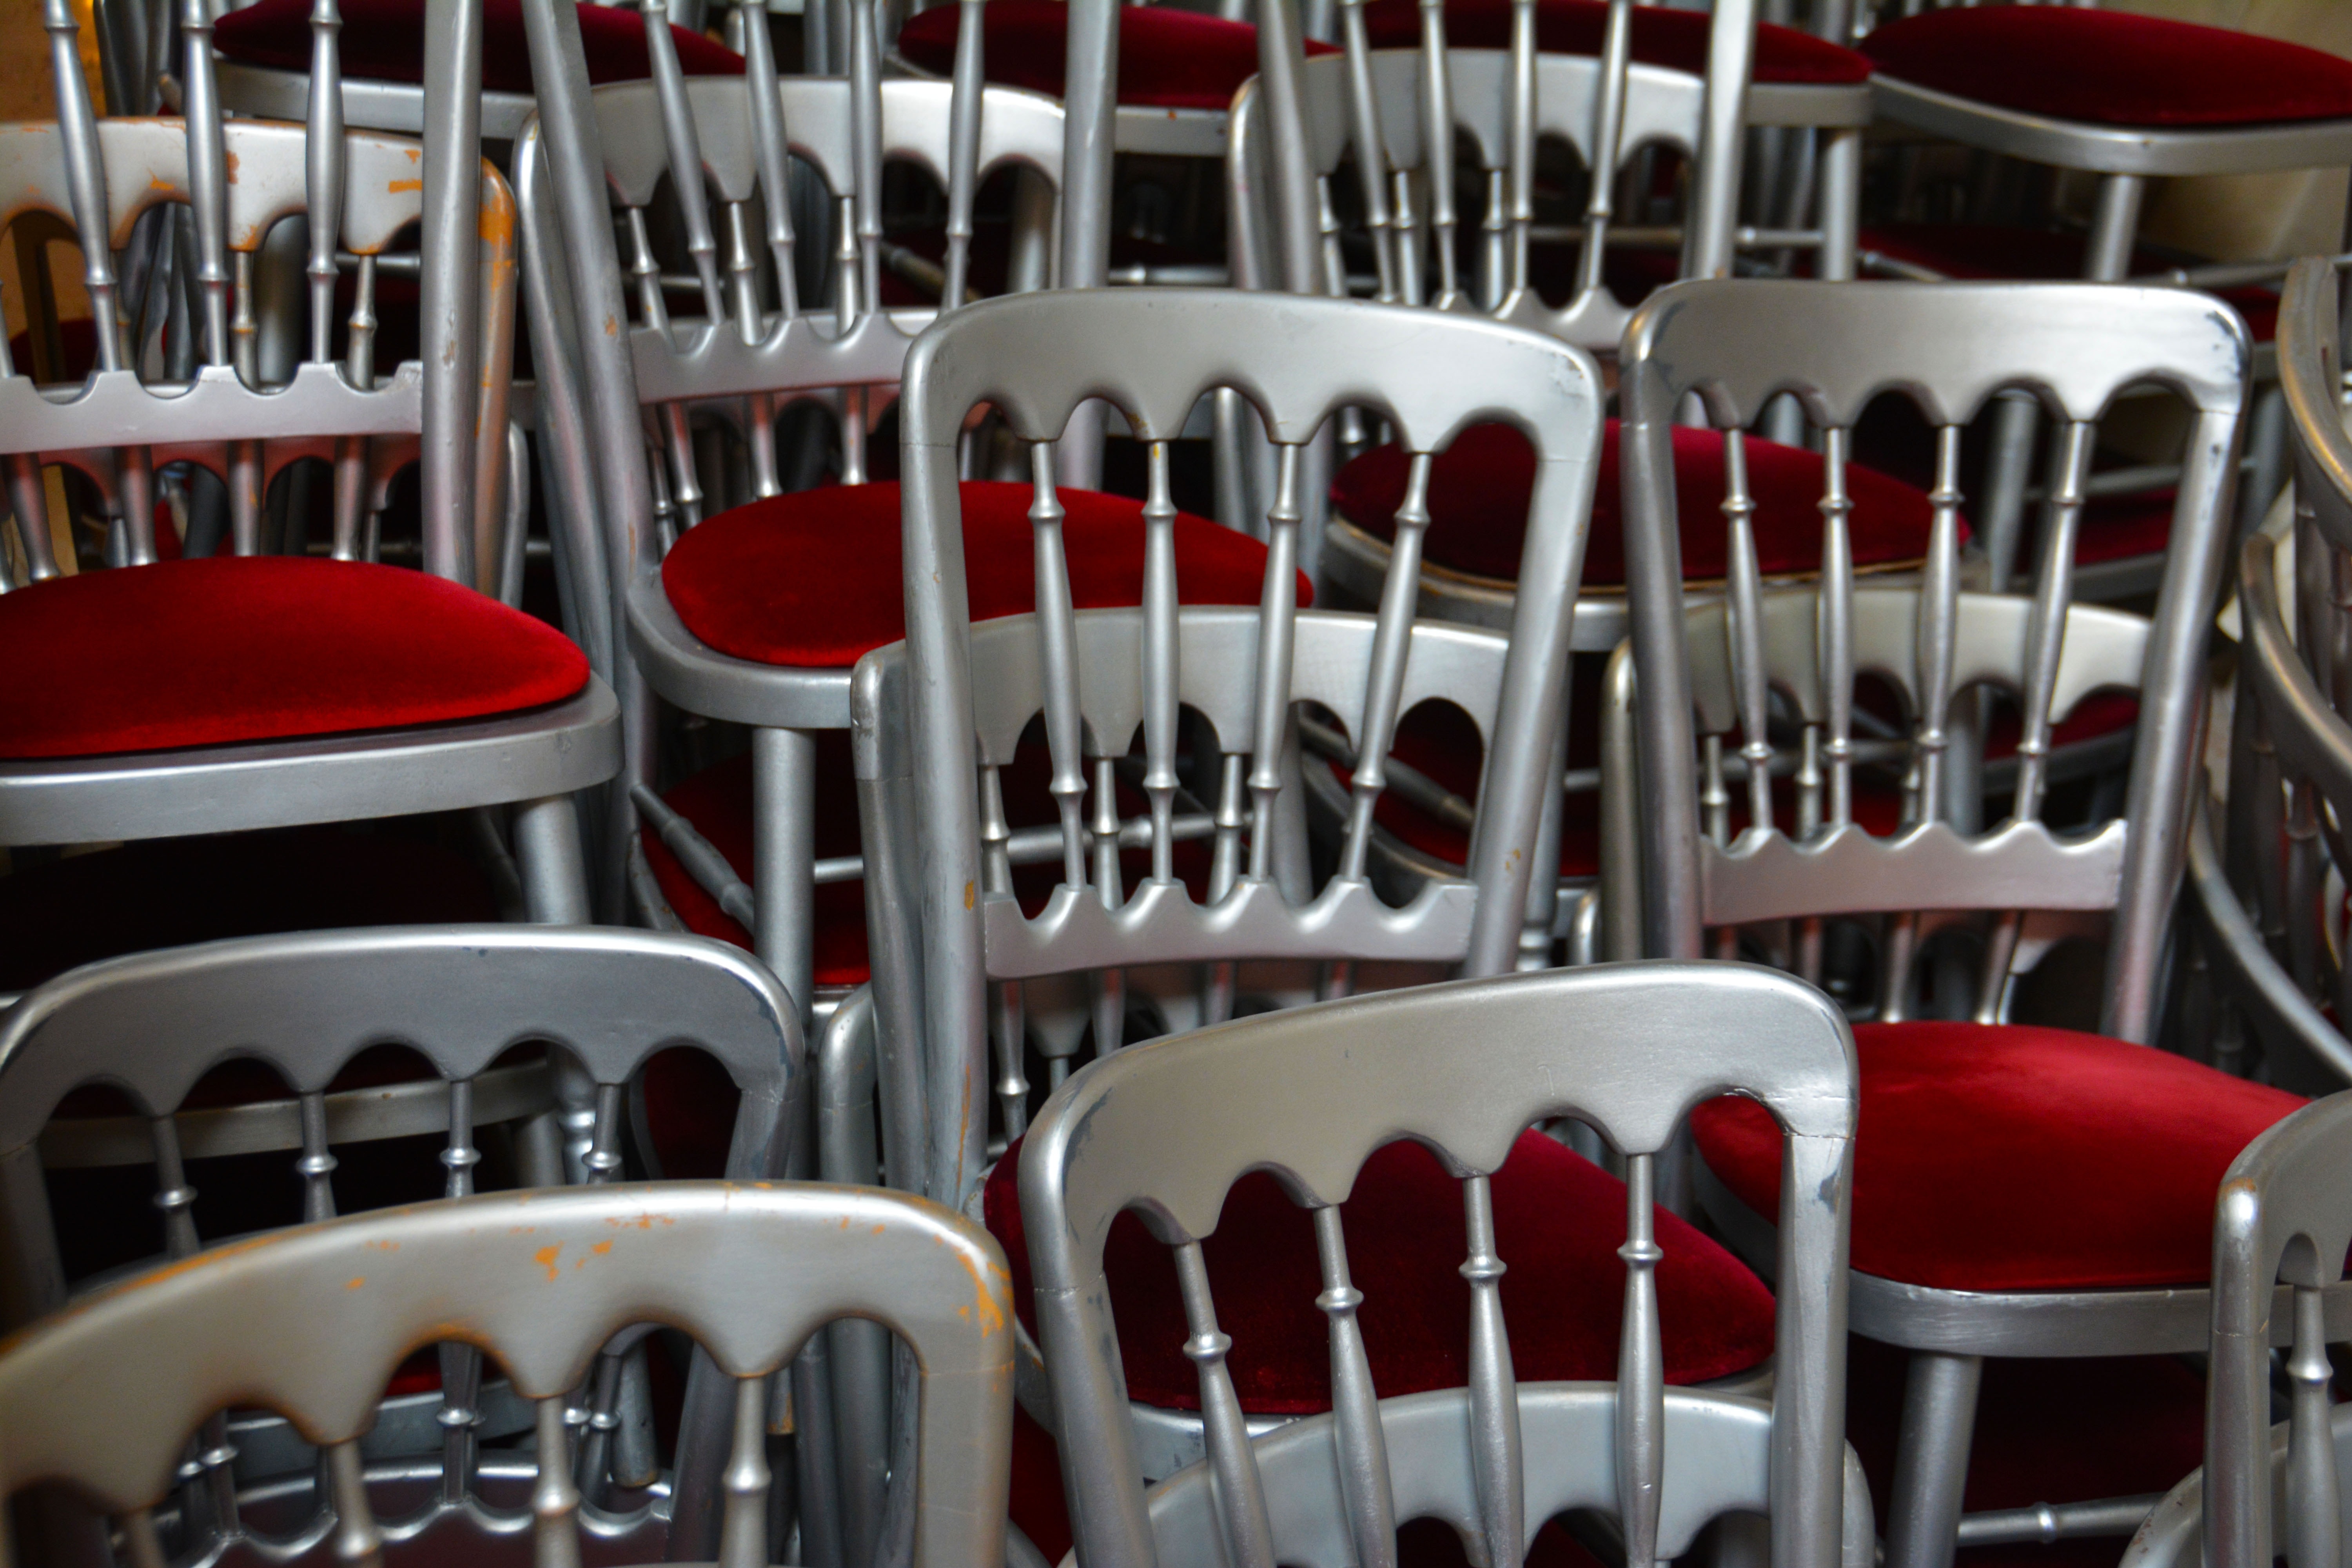 Stack, Seating, Seats, Stacked, Chairs, red, in a row